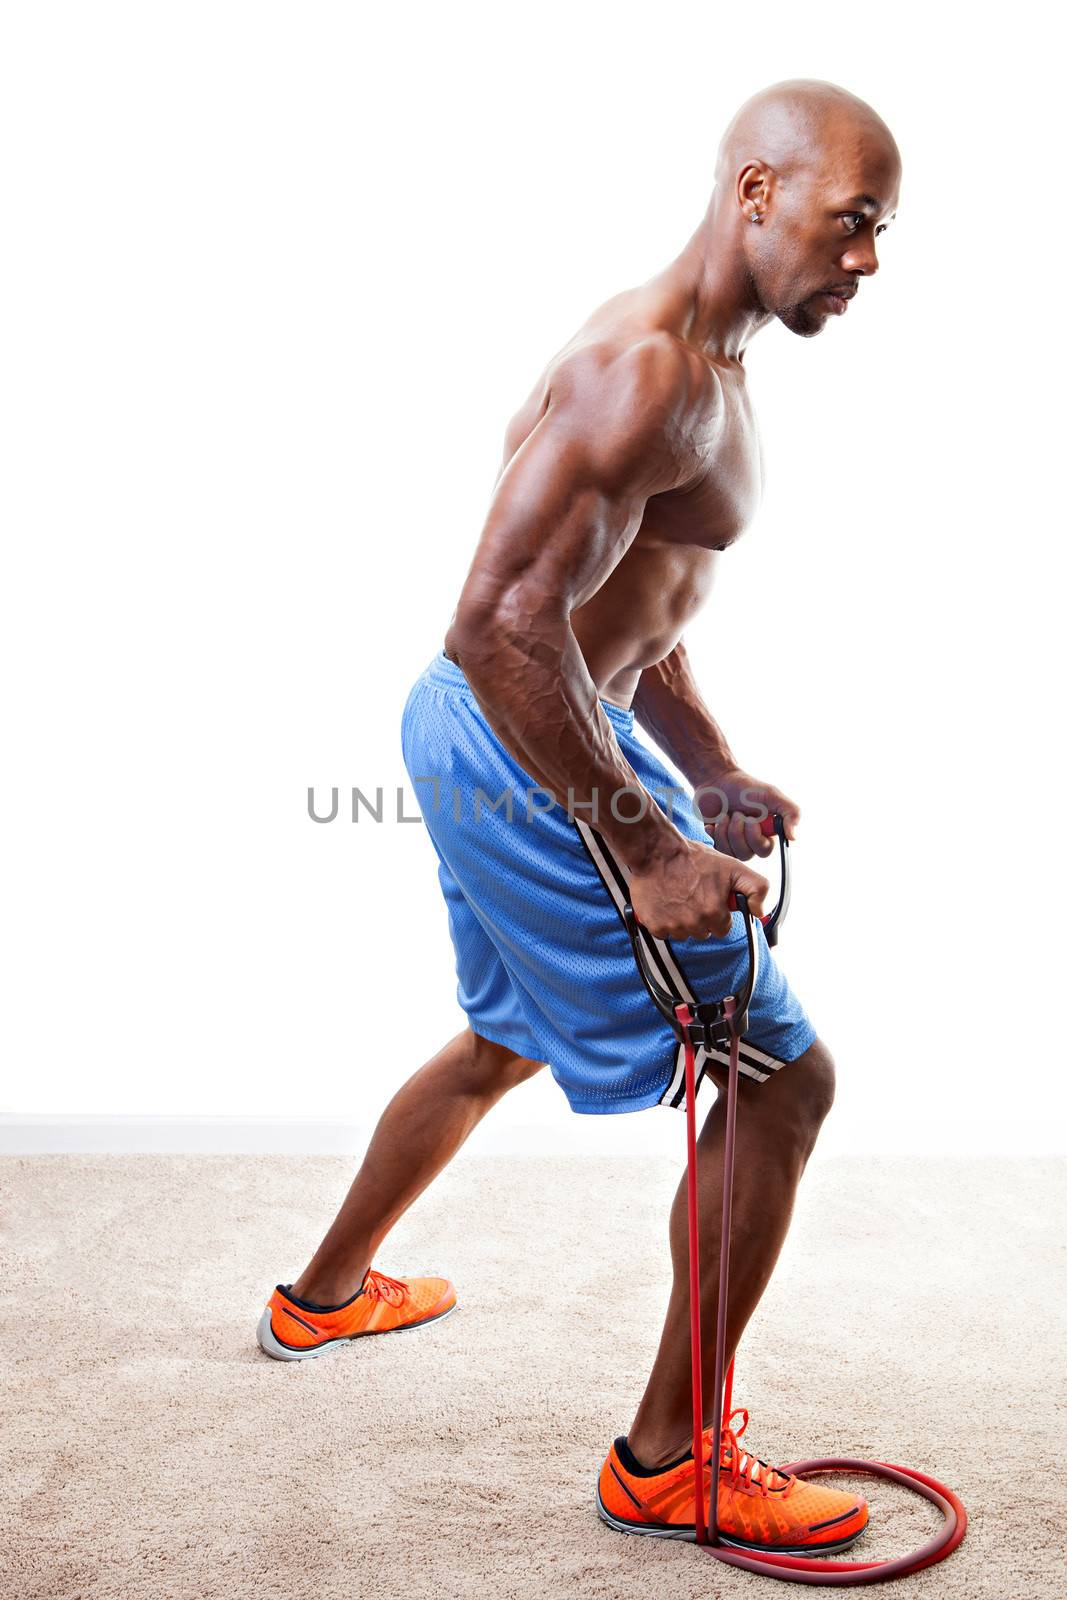 Ripped body builder working out  using a resistance band. 